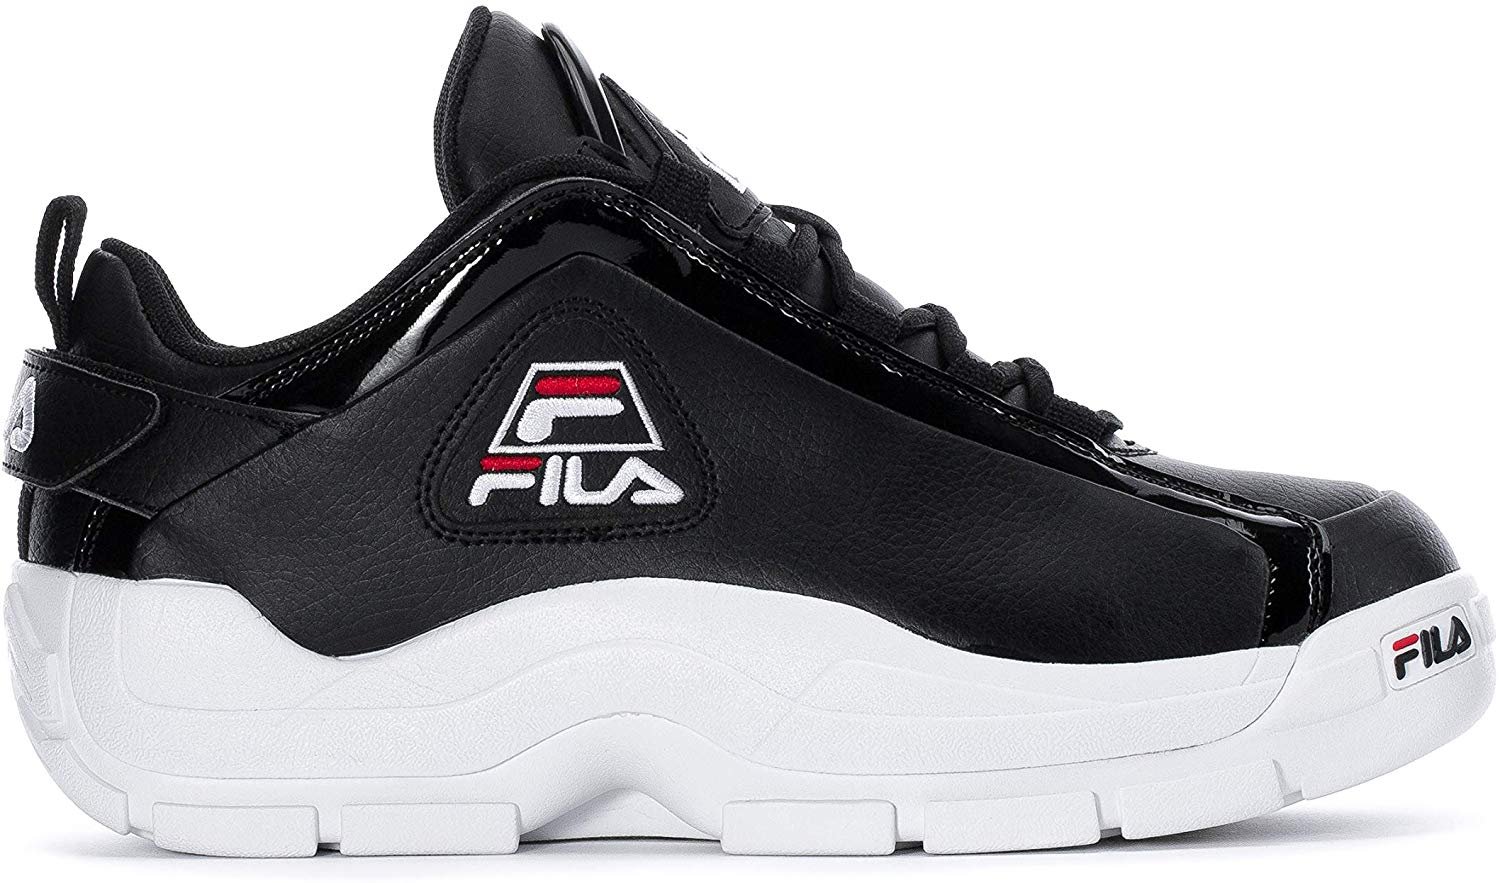 Grant Hill 2 Low Shoes 